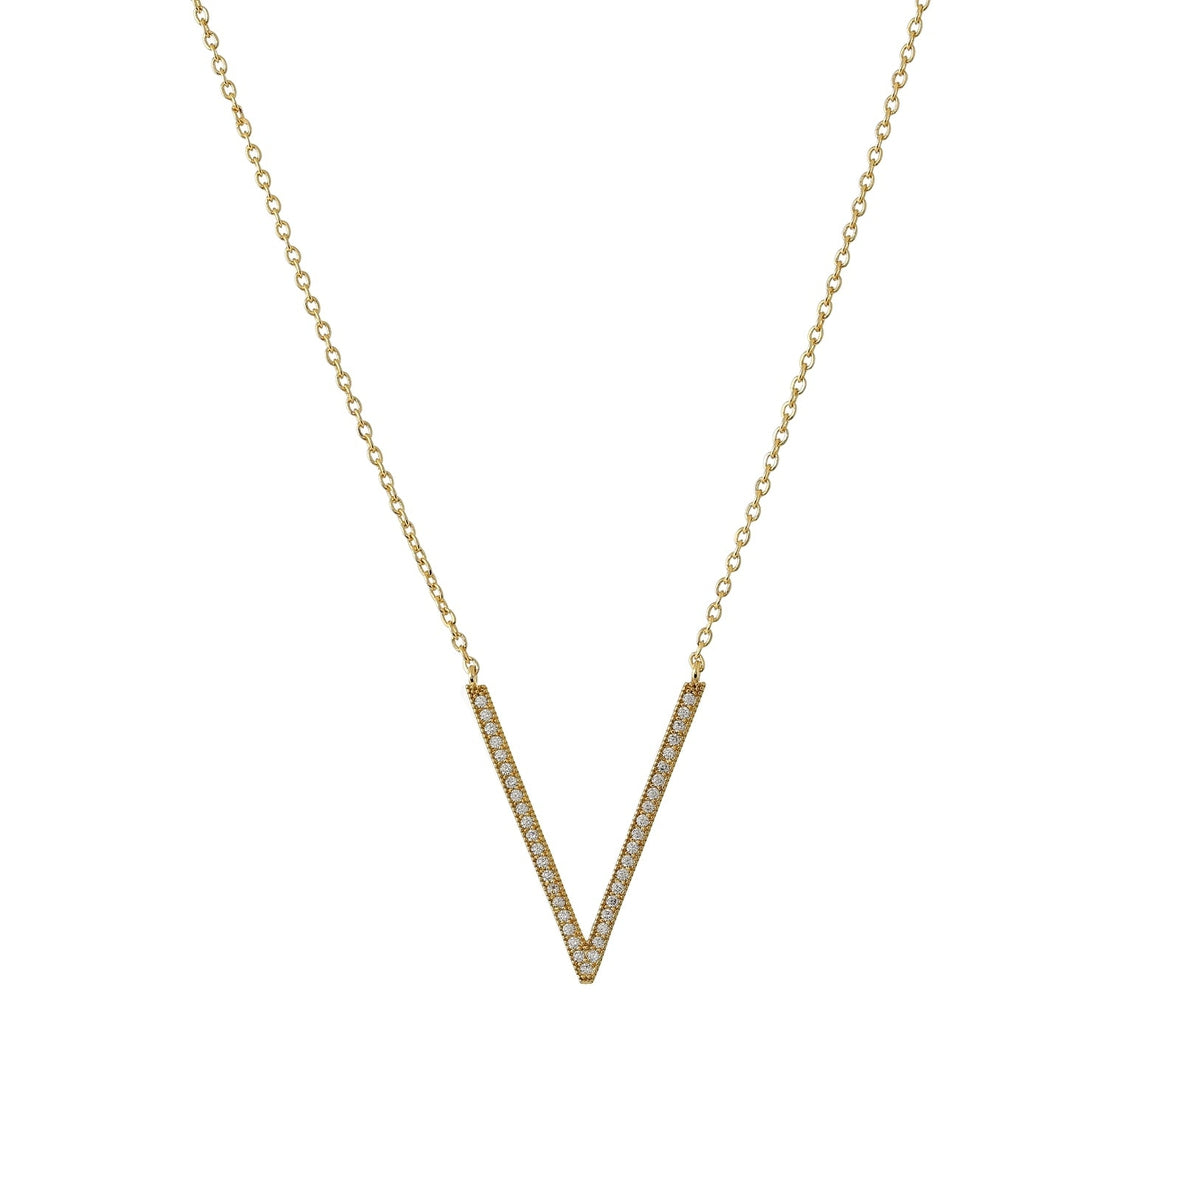 The V Elegance Casual Necklace